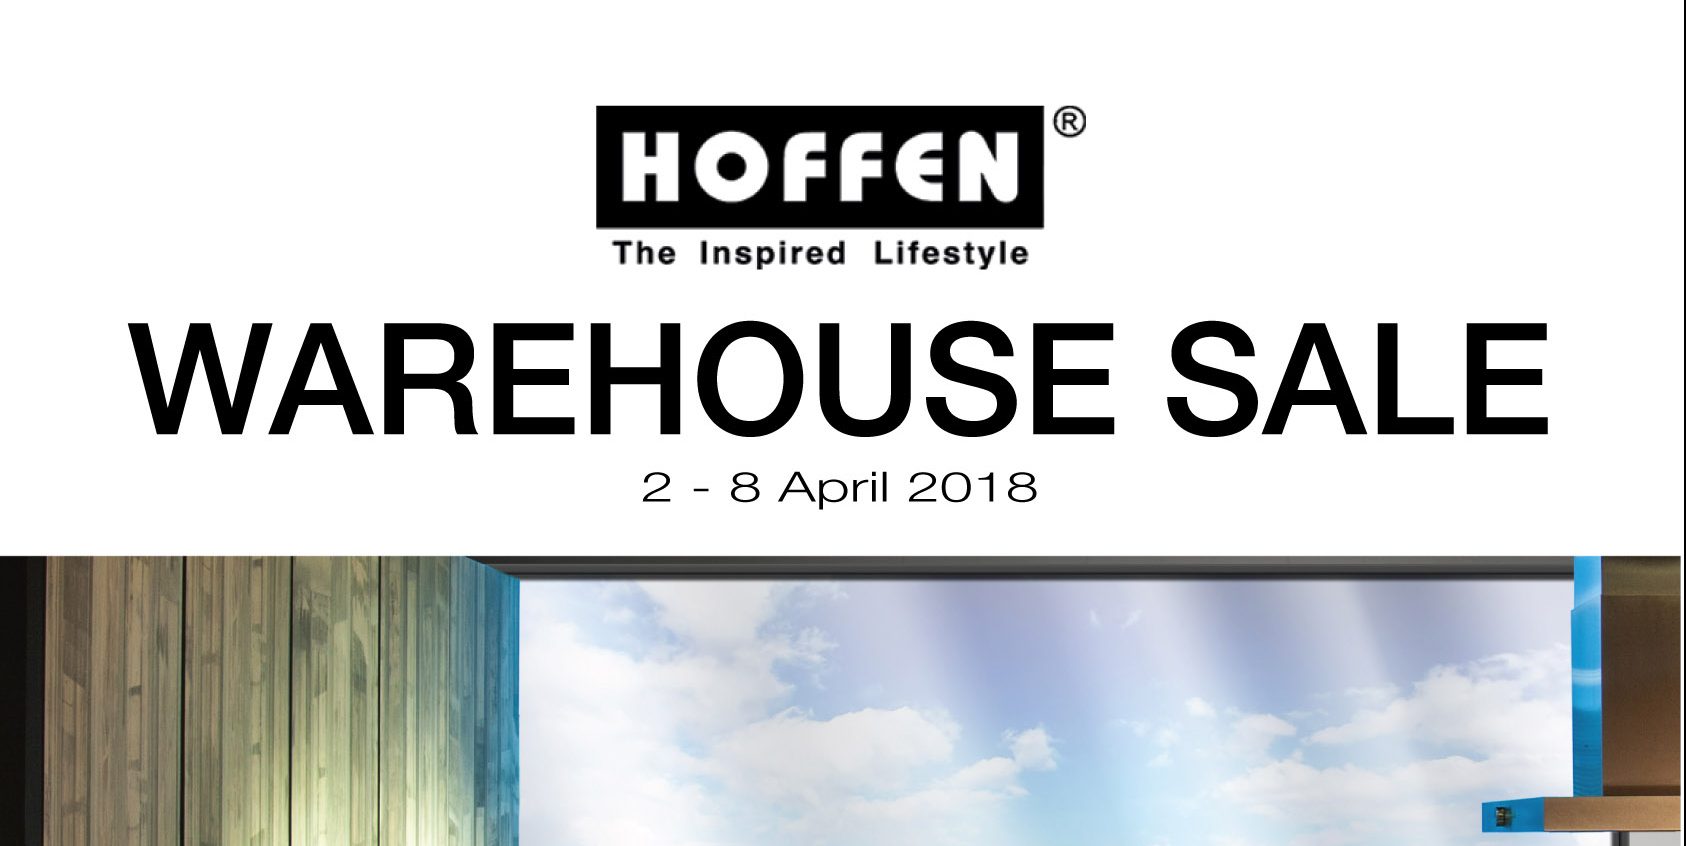 Hoffen Singapore Warehouse Sale Up to 30% Off Promotion 2-8 Apr 2018